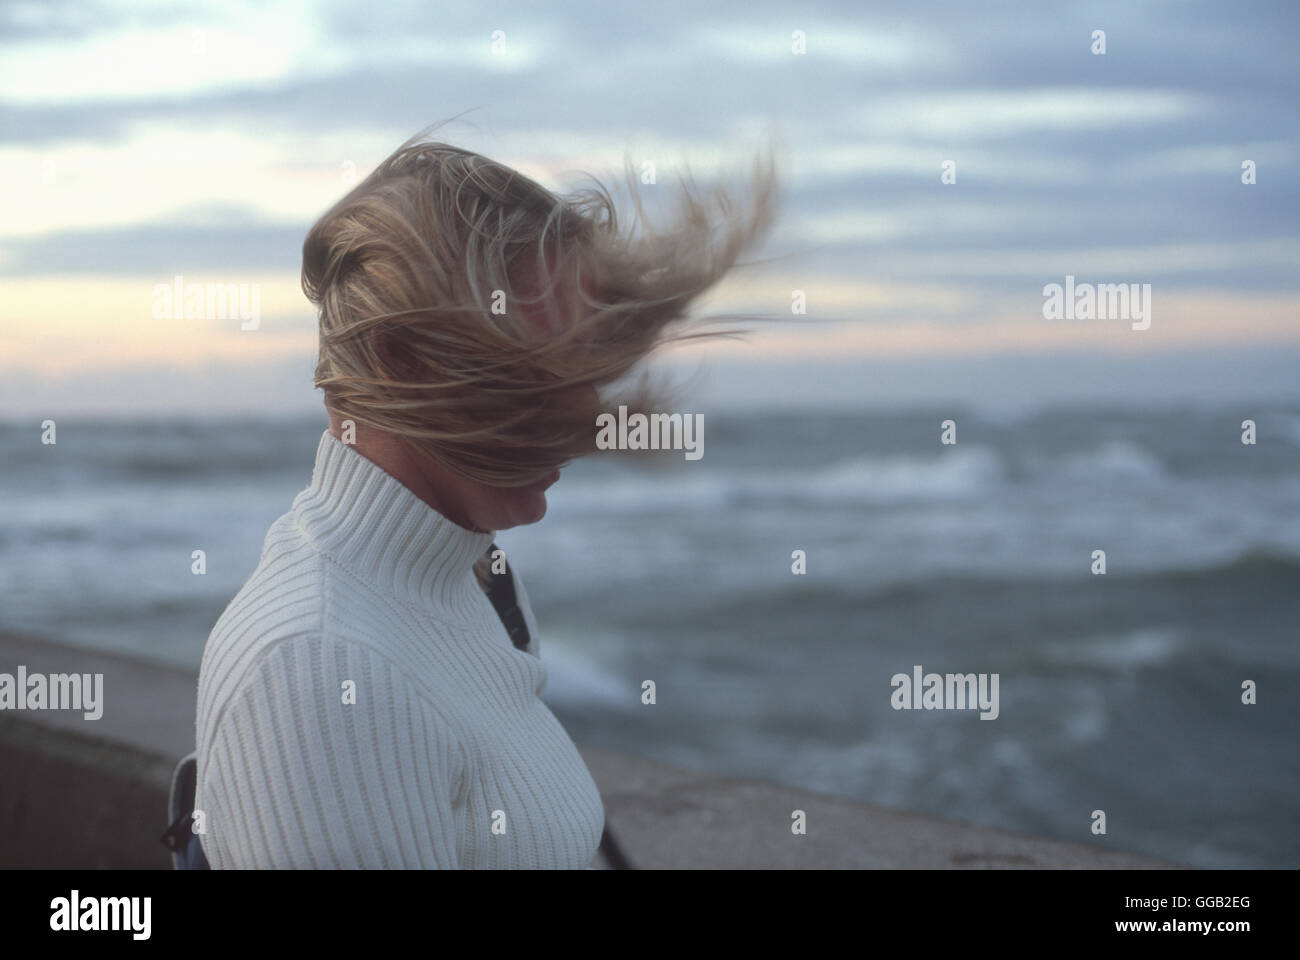 Woman's hair blowing in wind in front of sea waves and cloudy sky at sunset Stock Photo